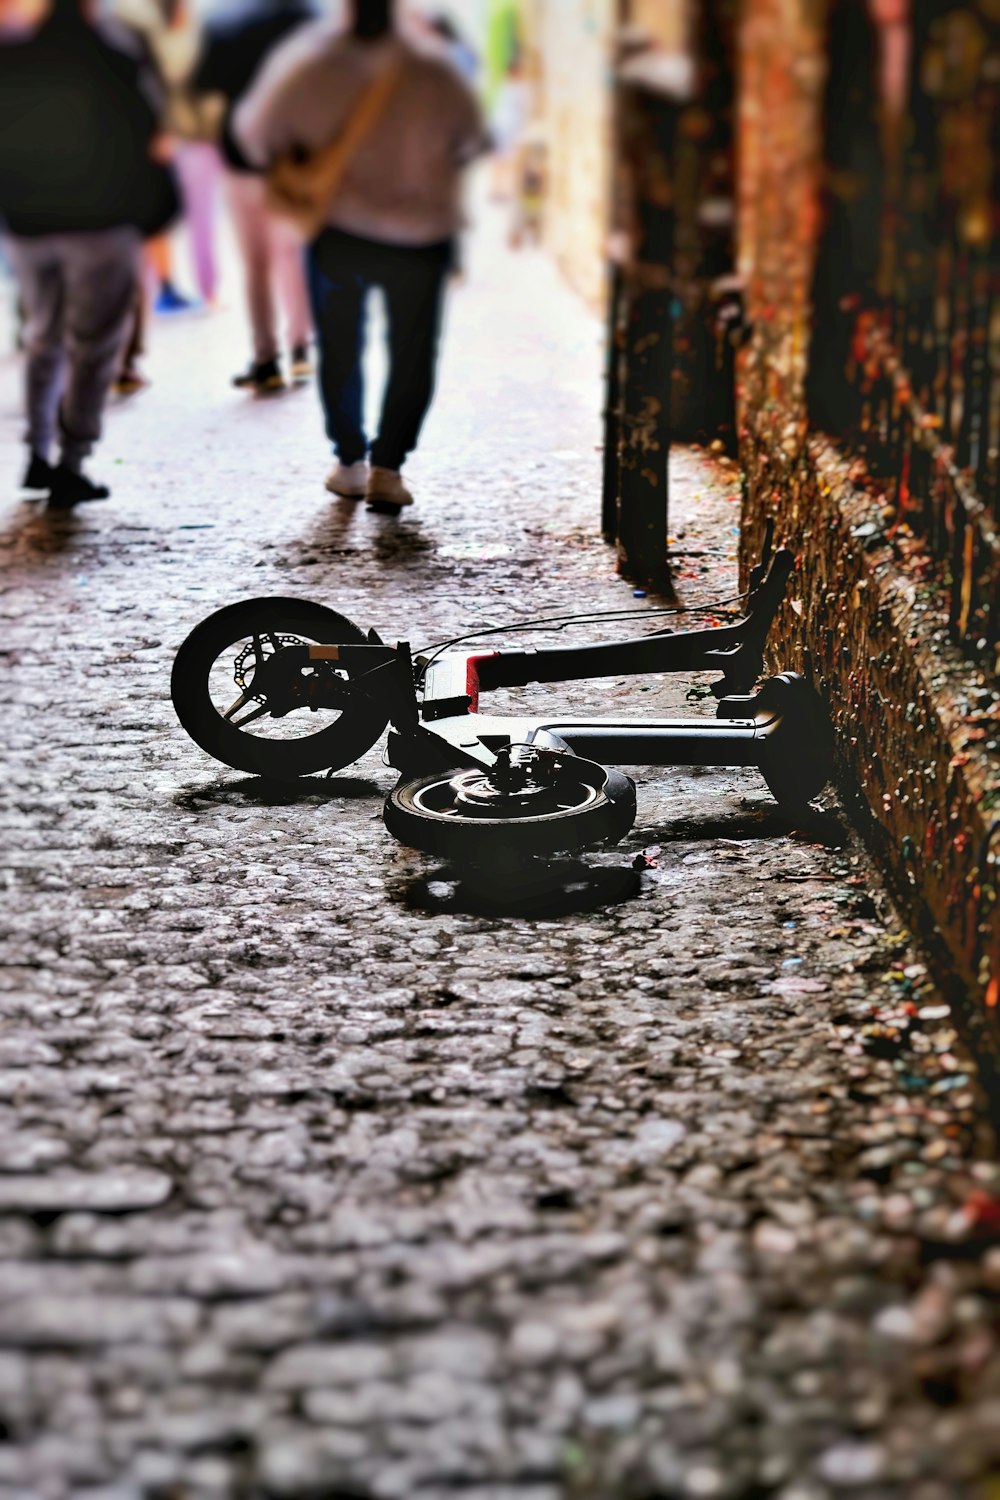 a broken bike laying on the ground in the middle of a street